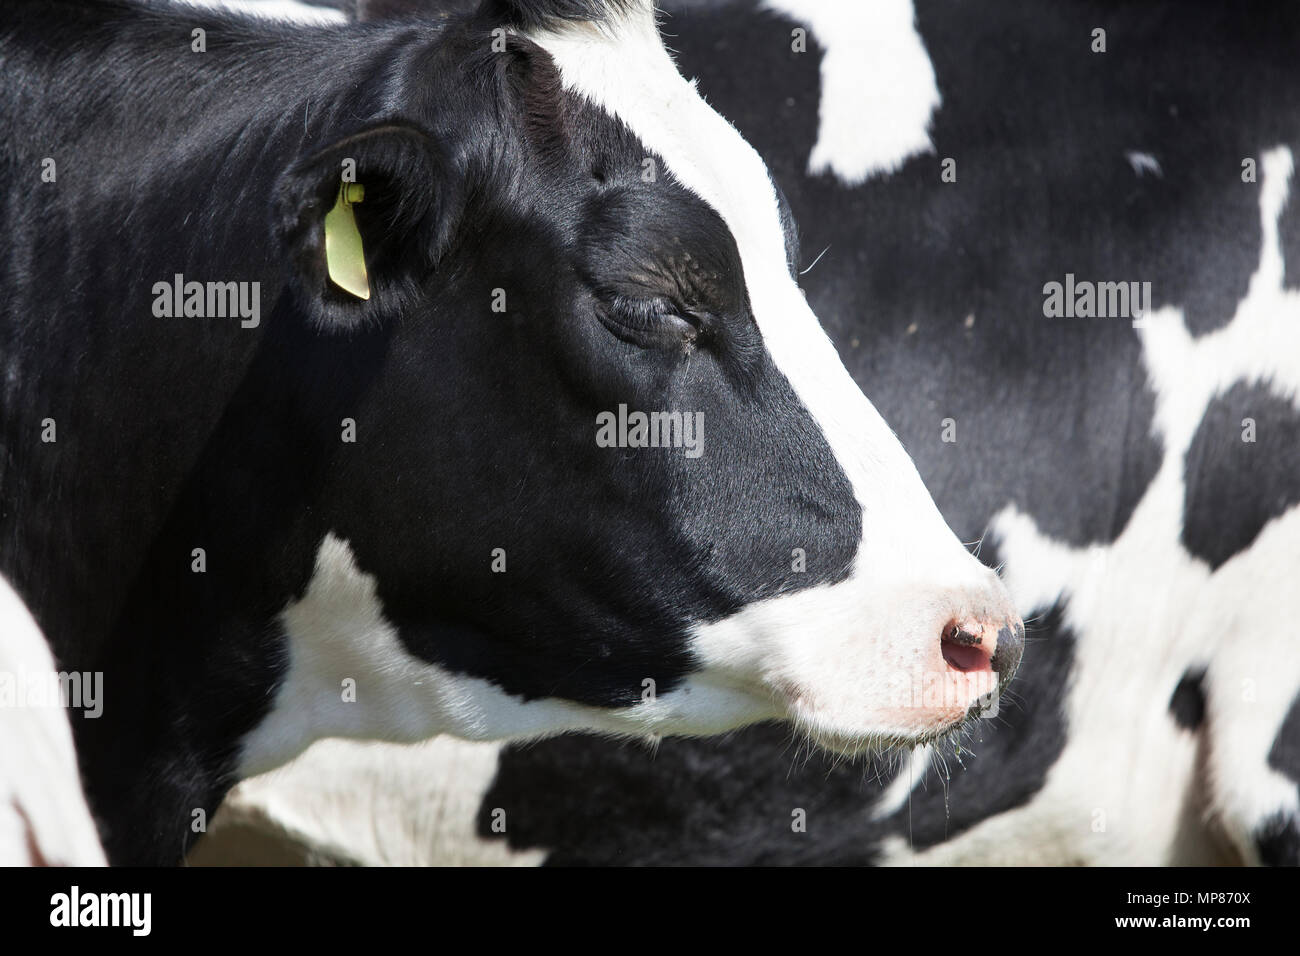 young black and white cow head and body Stock Photo